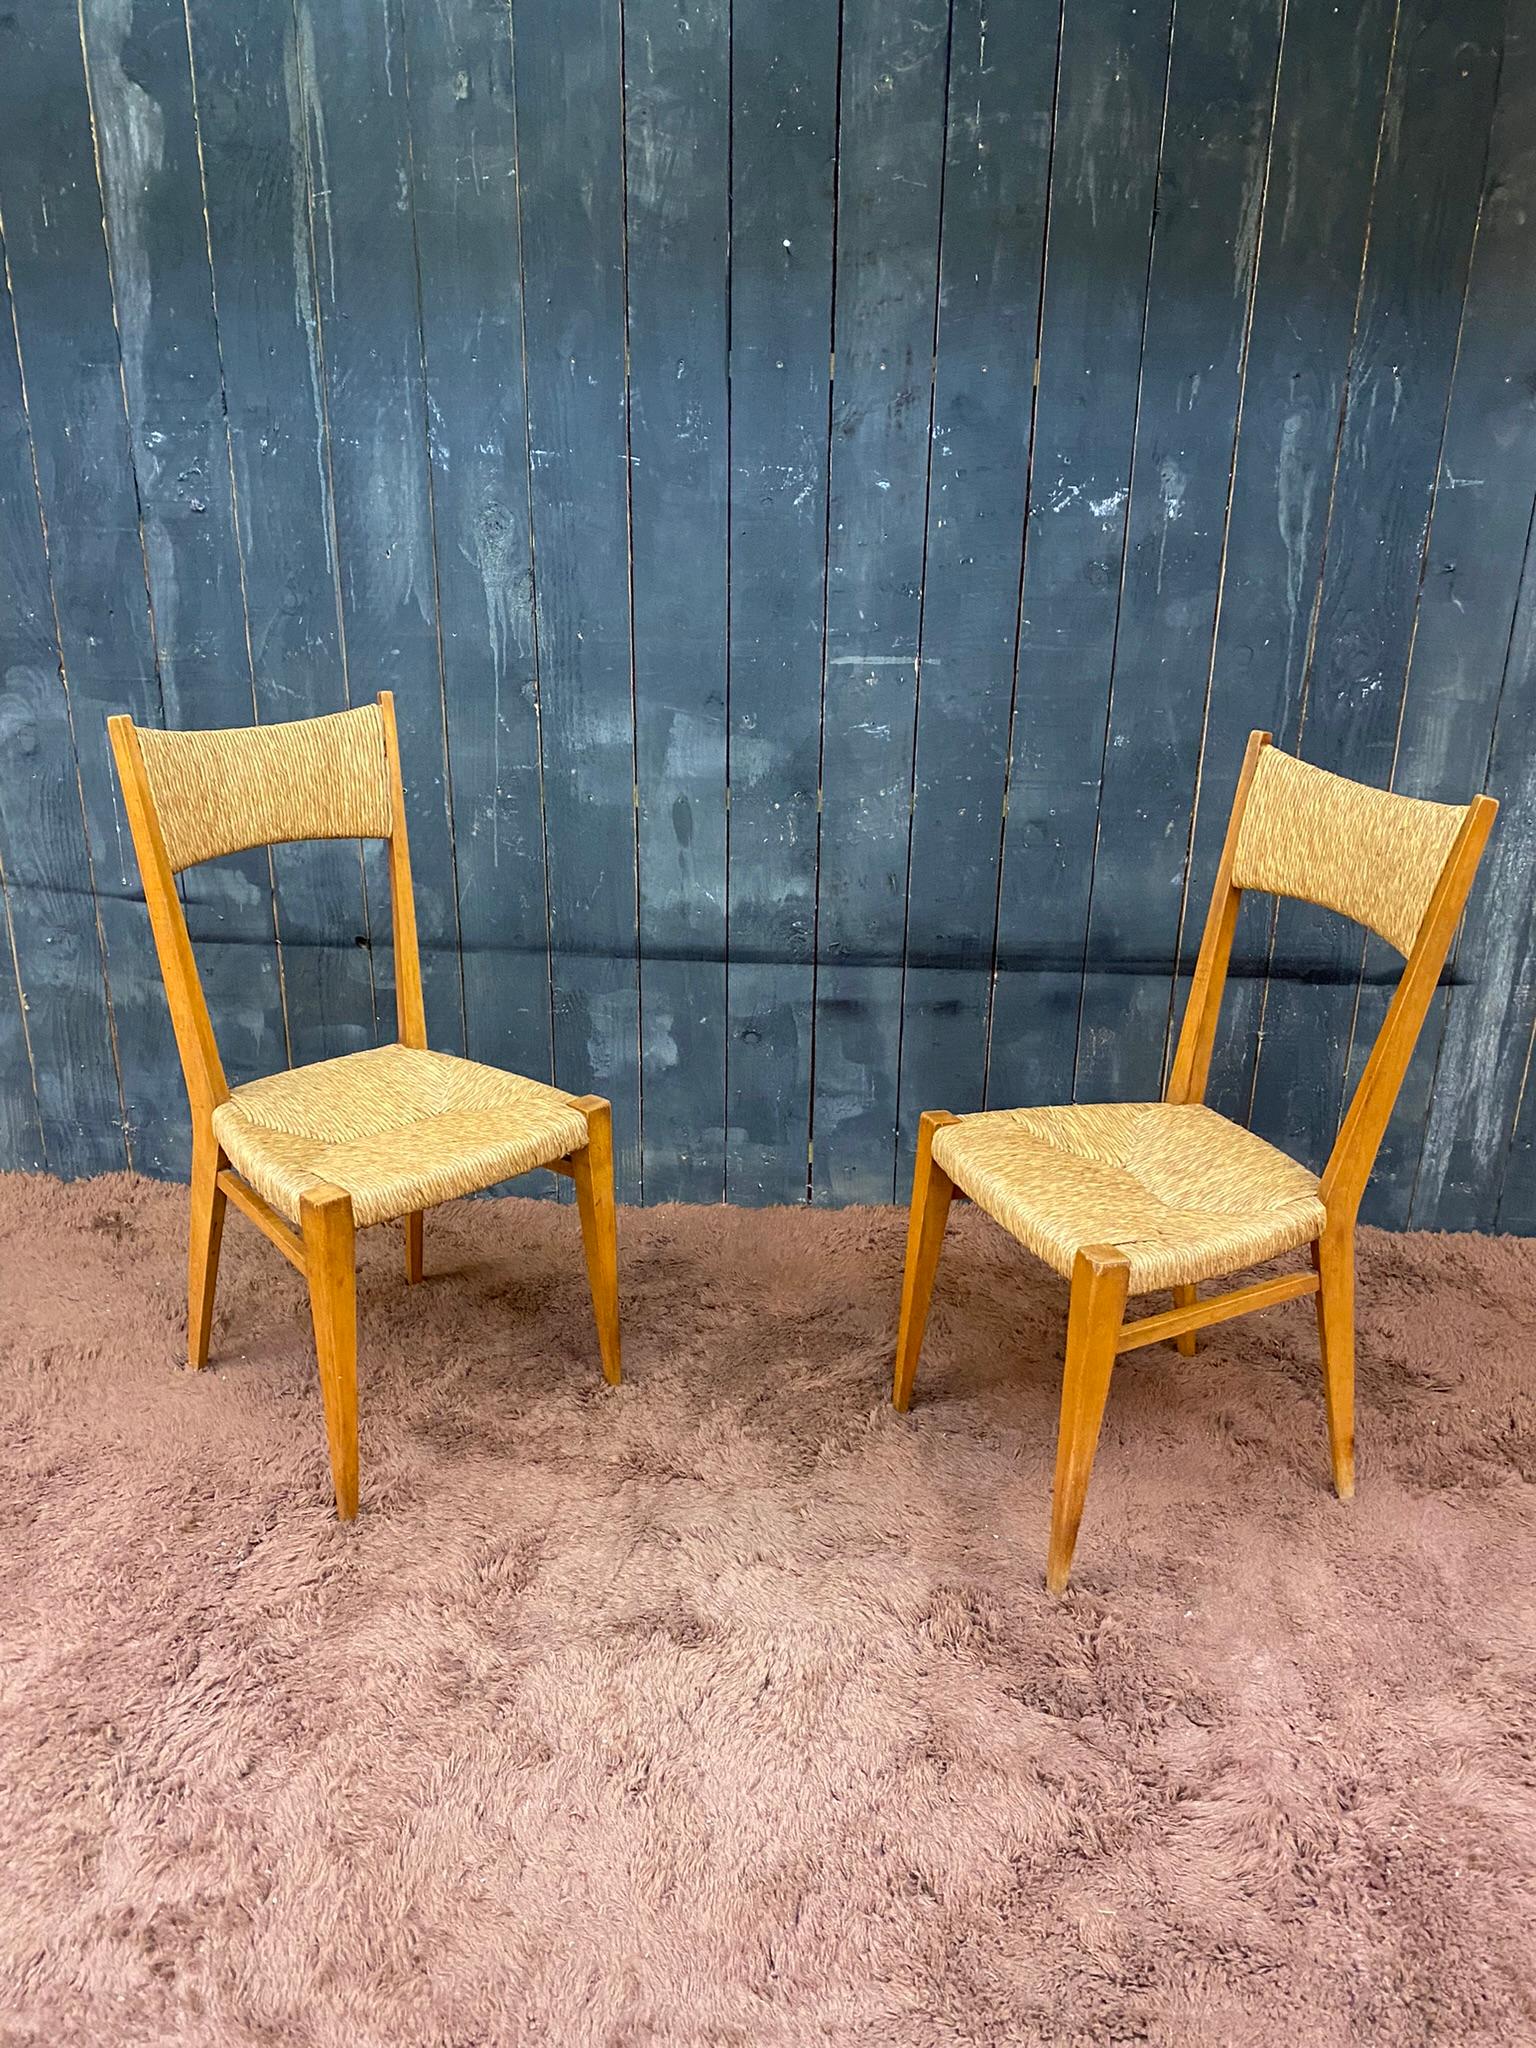 Series of 6 Elegant Oak Chairs, French Reconstruction Period, circa 1950 For Sale 3